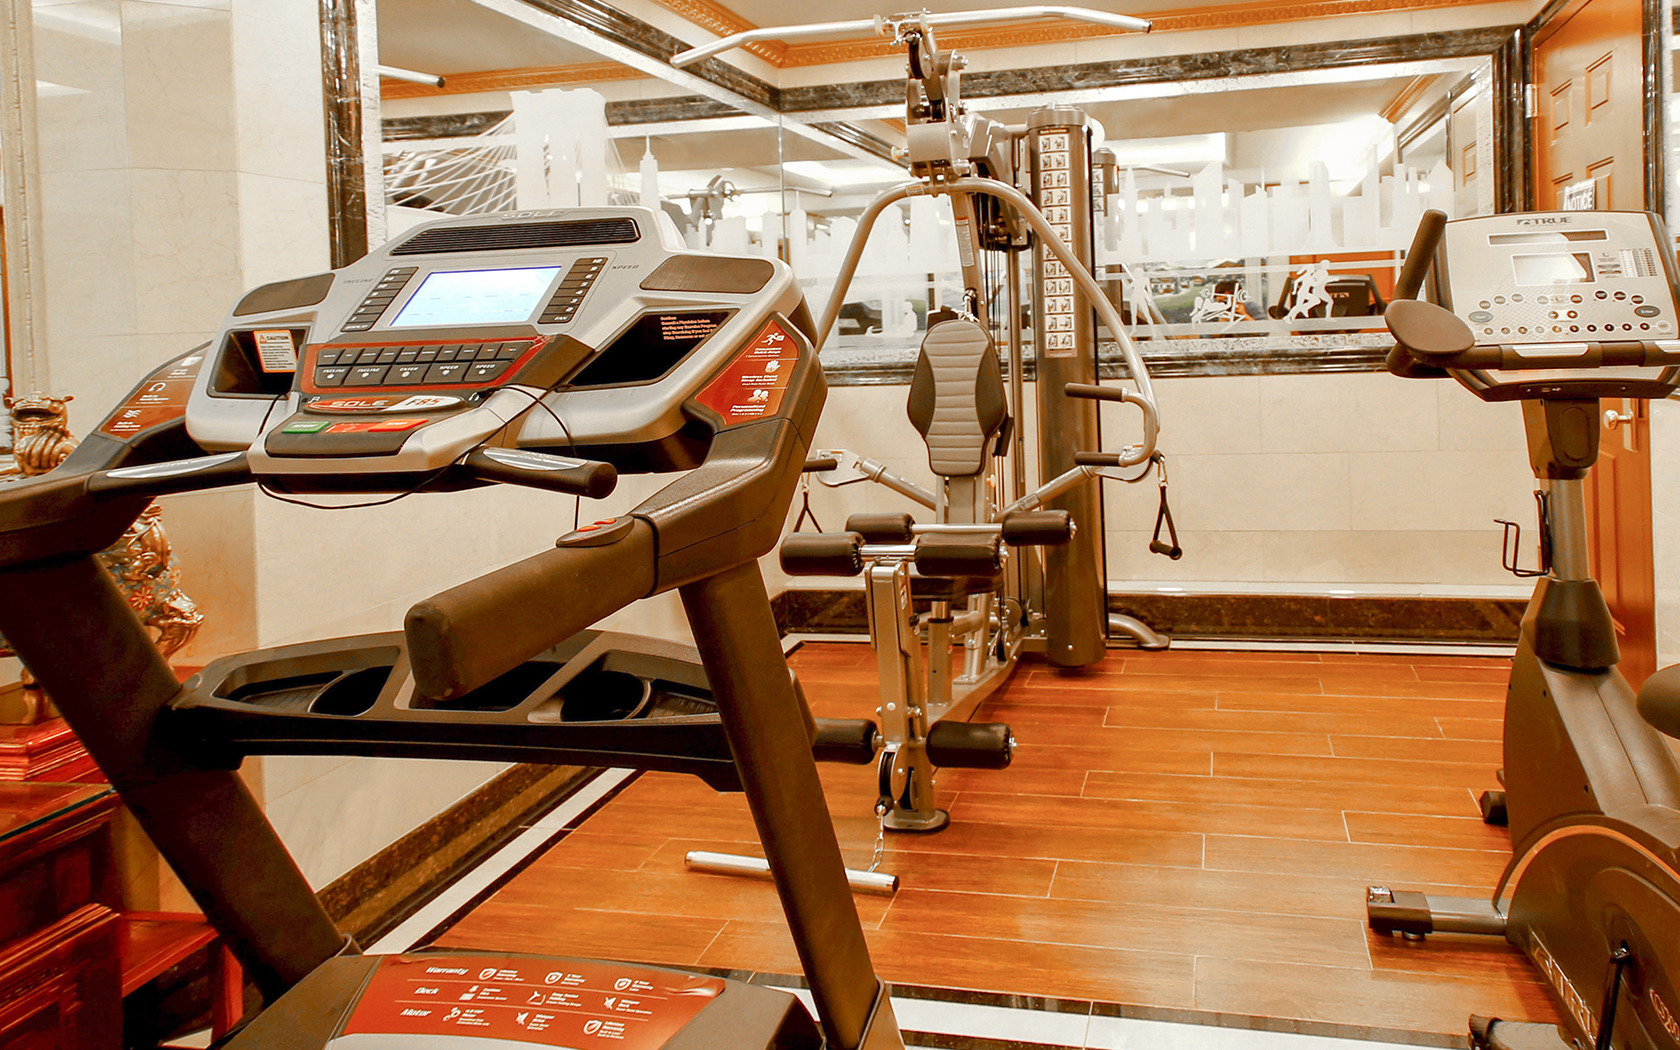 Inside hotel gym with workout equipment